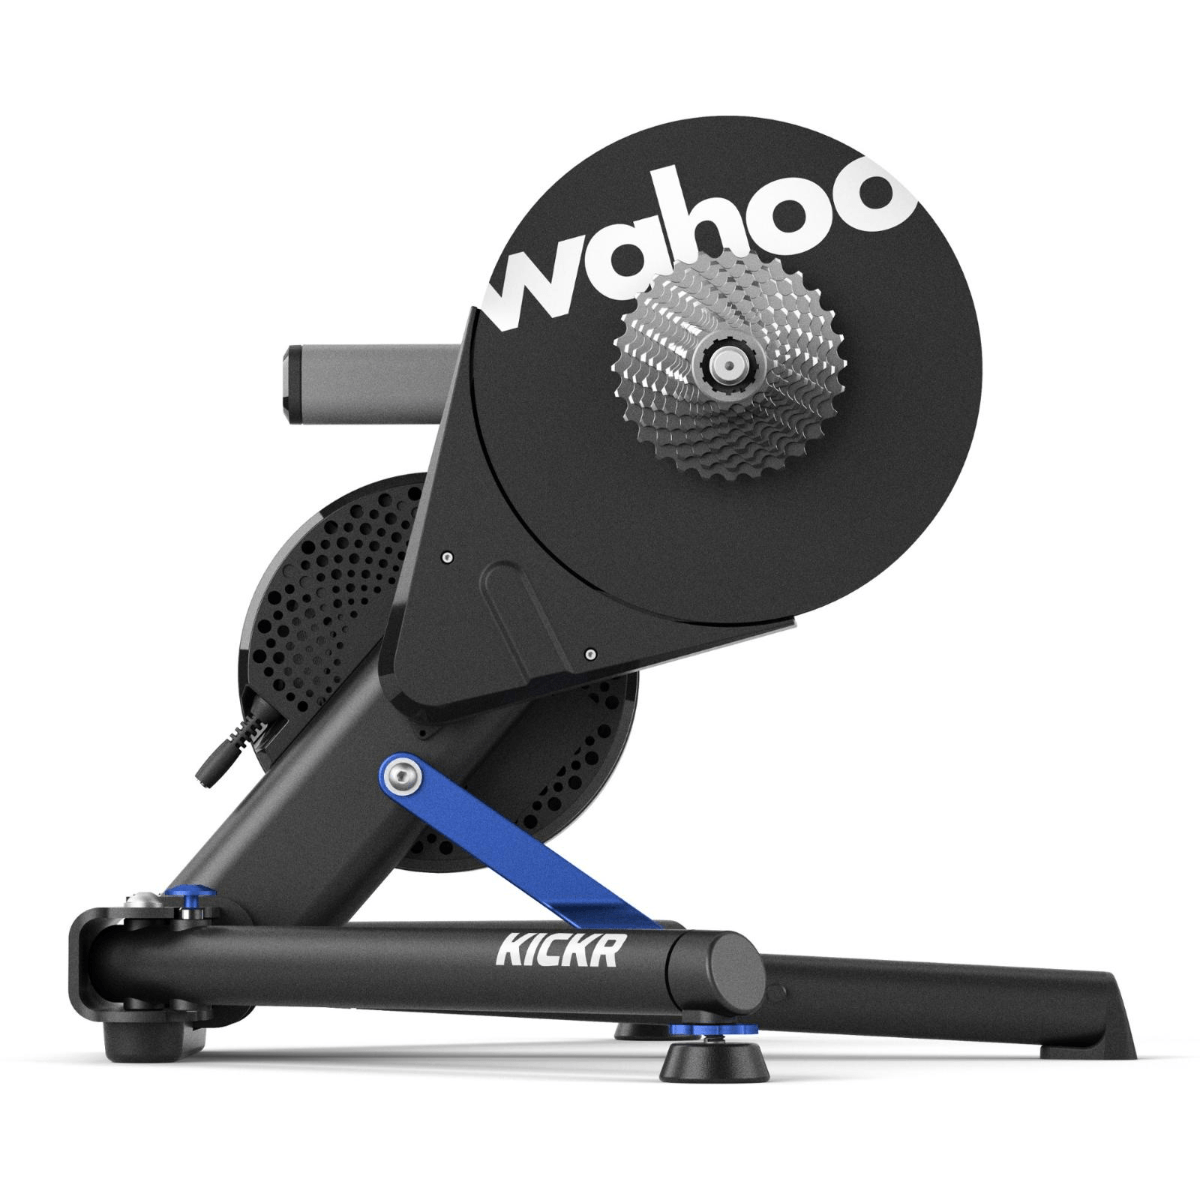 First look at Wahoo Fitness KICKR ANT+/Bluetooth Smart Trainer with power  meter